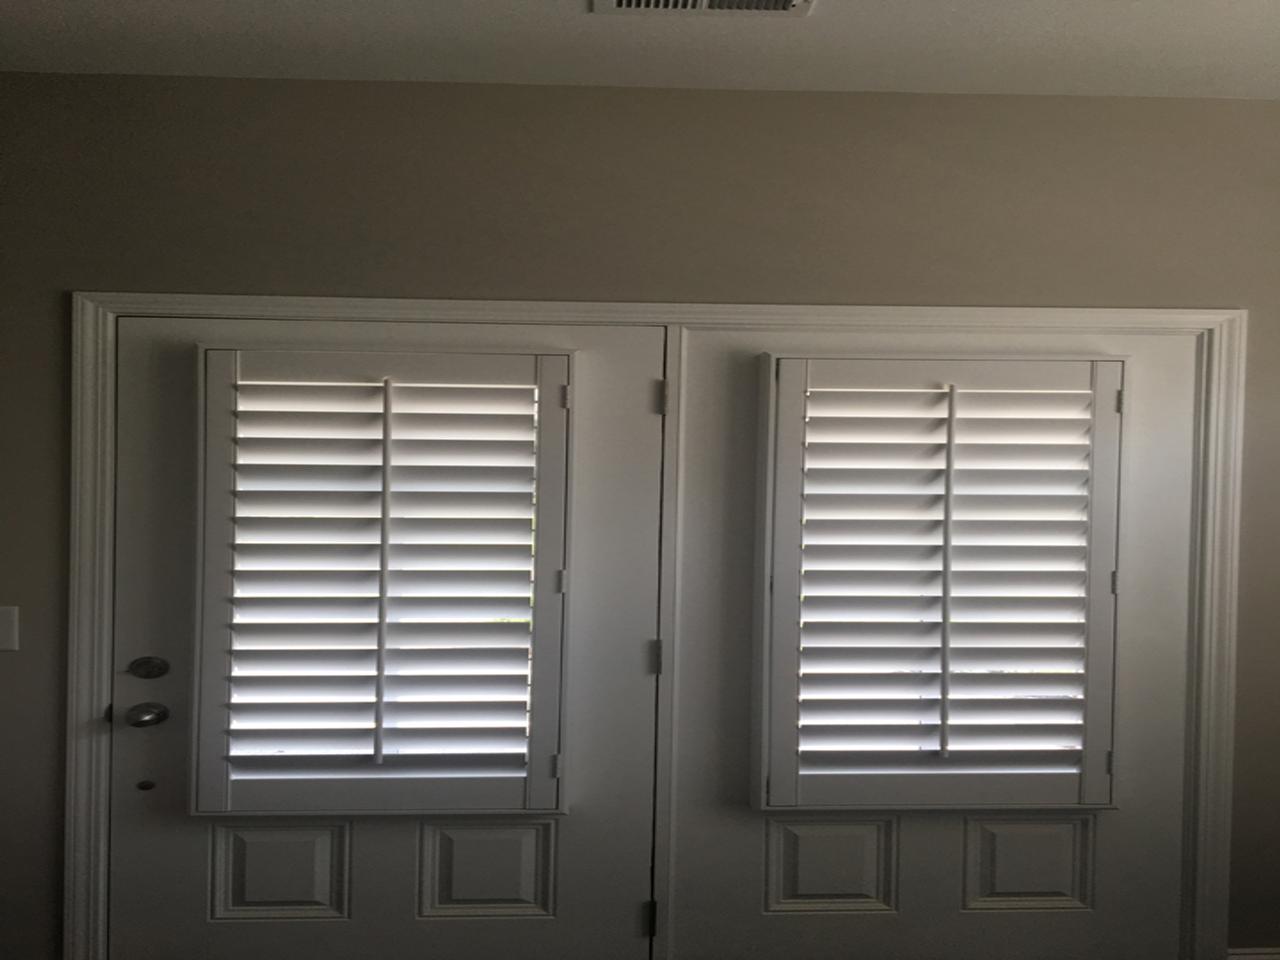 Double doors with plantation shutters on the windows on the top portions